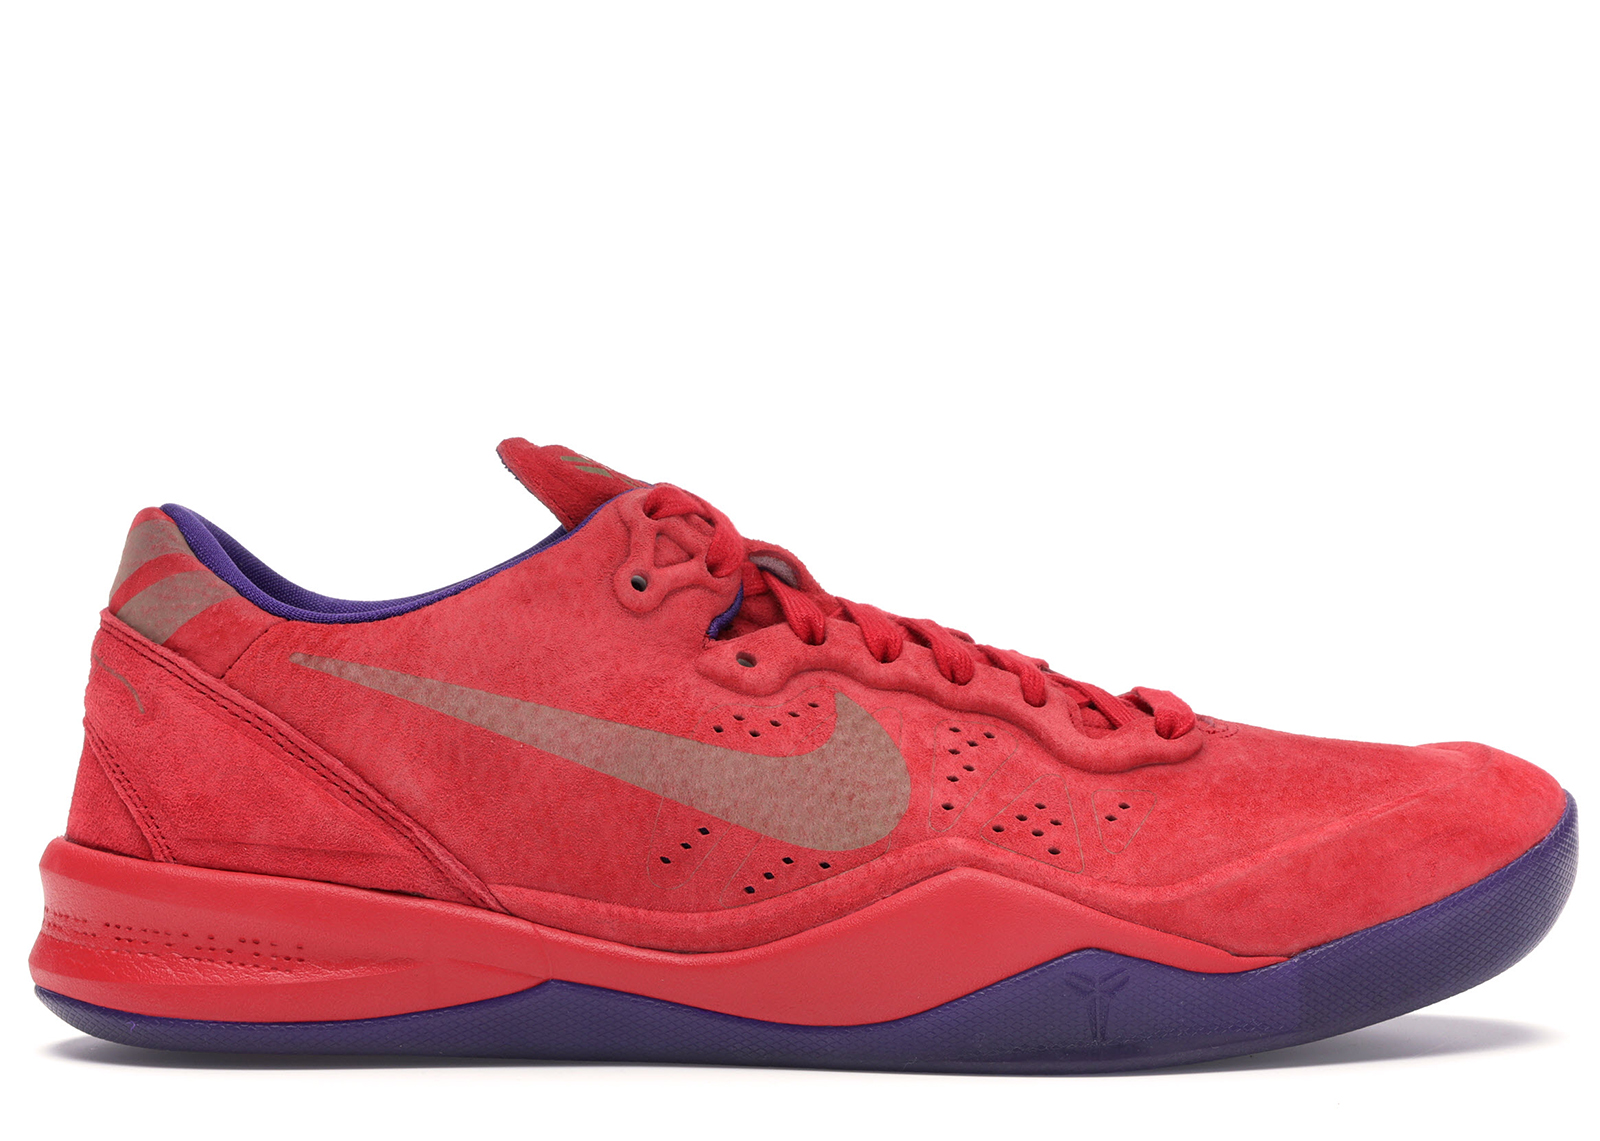 Nike Kobe 8 EXT Year of the Snake (Red 